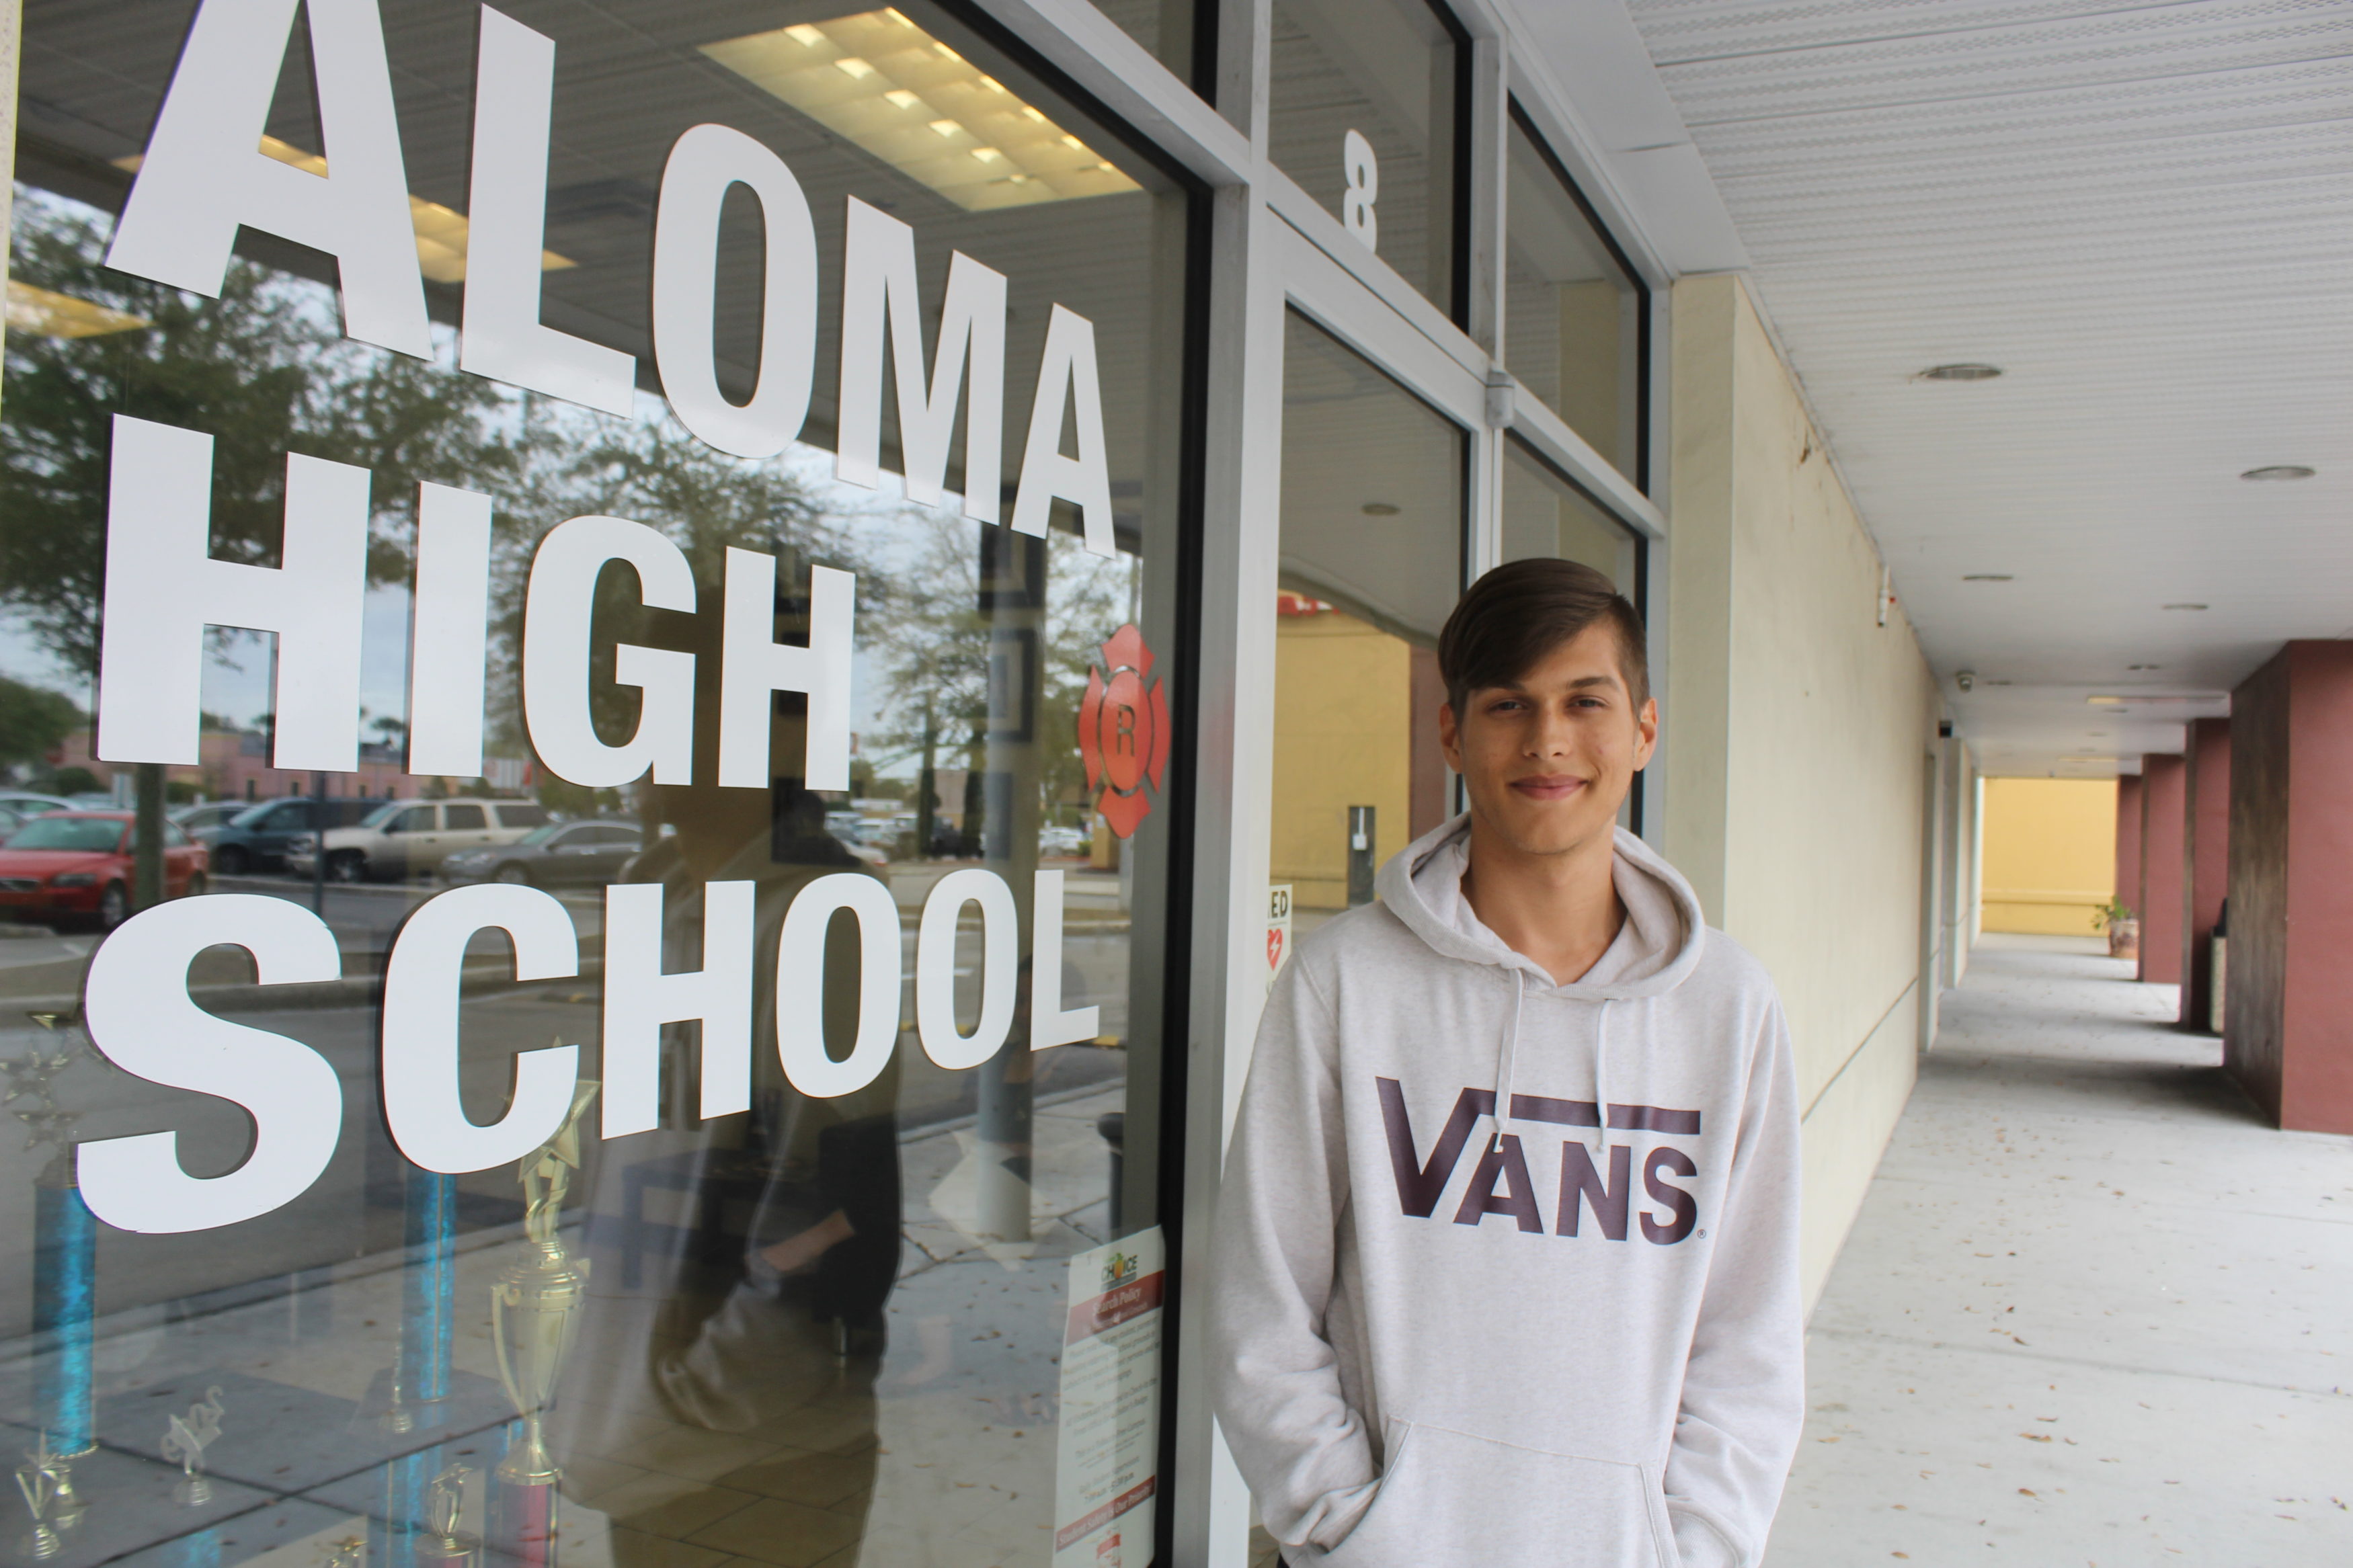 After life on Orlando streets, Aloma Charter High gives teen renewed focus